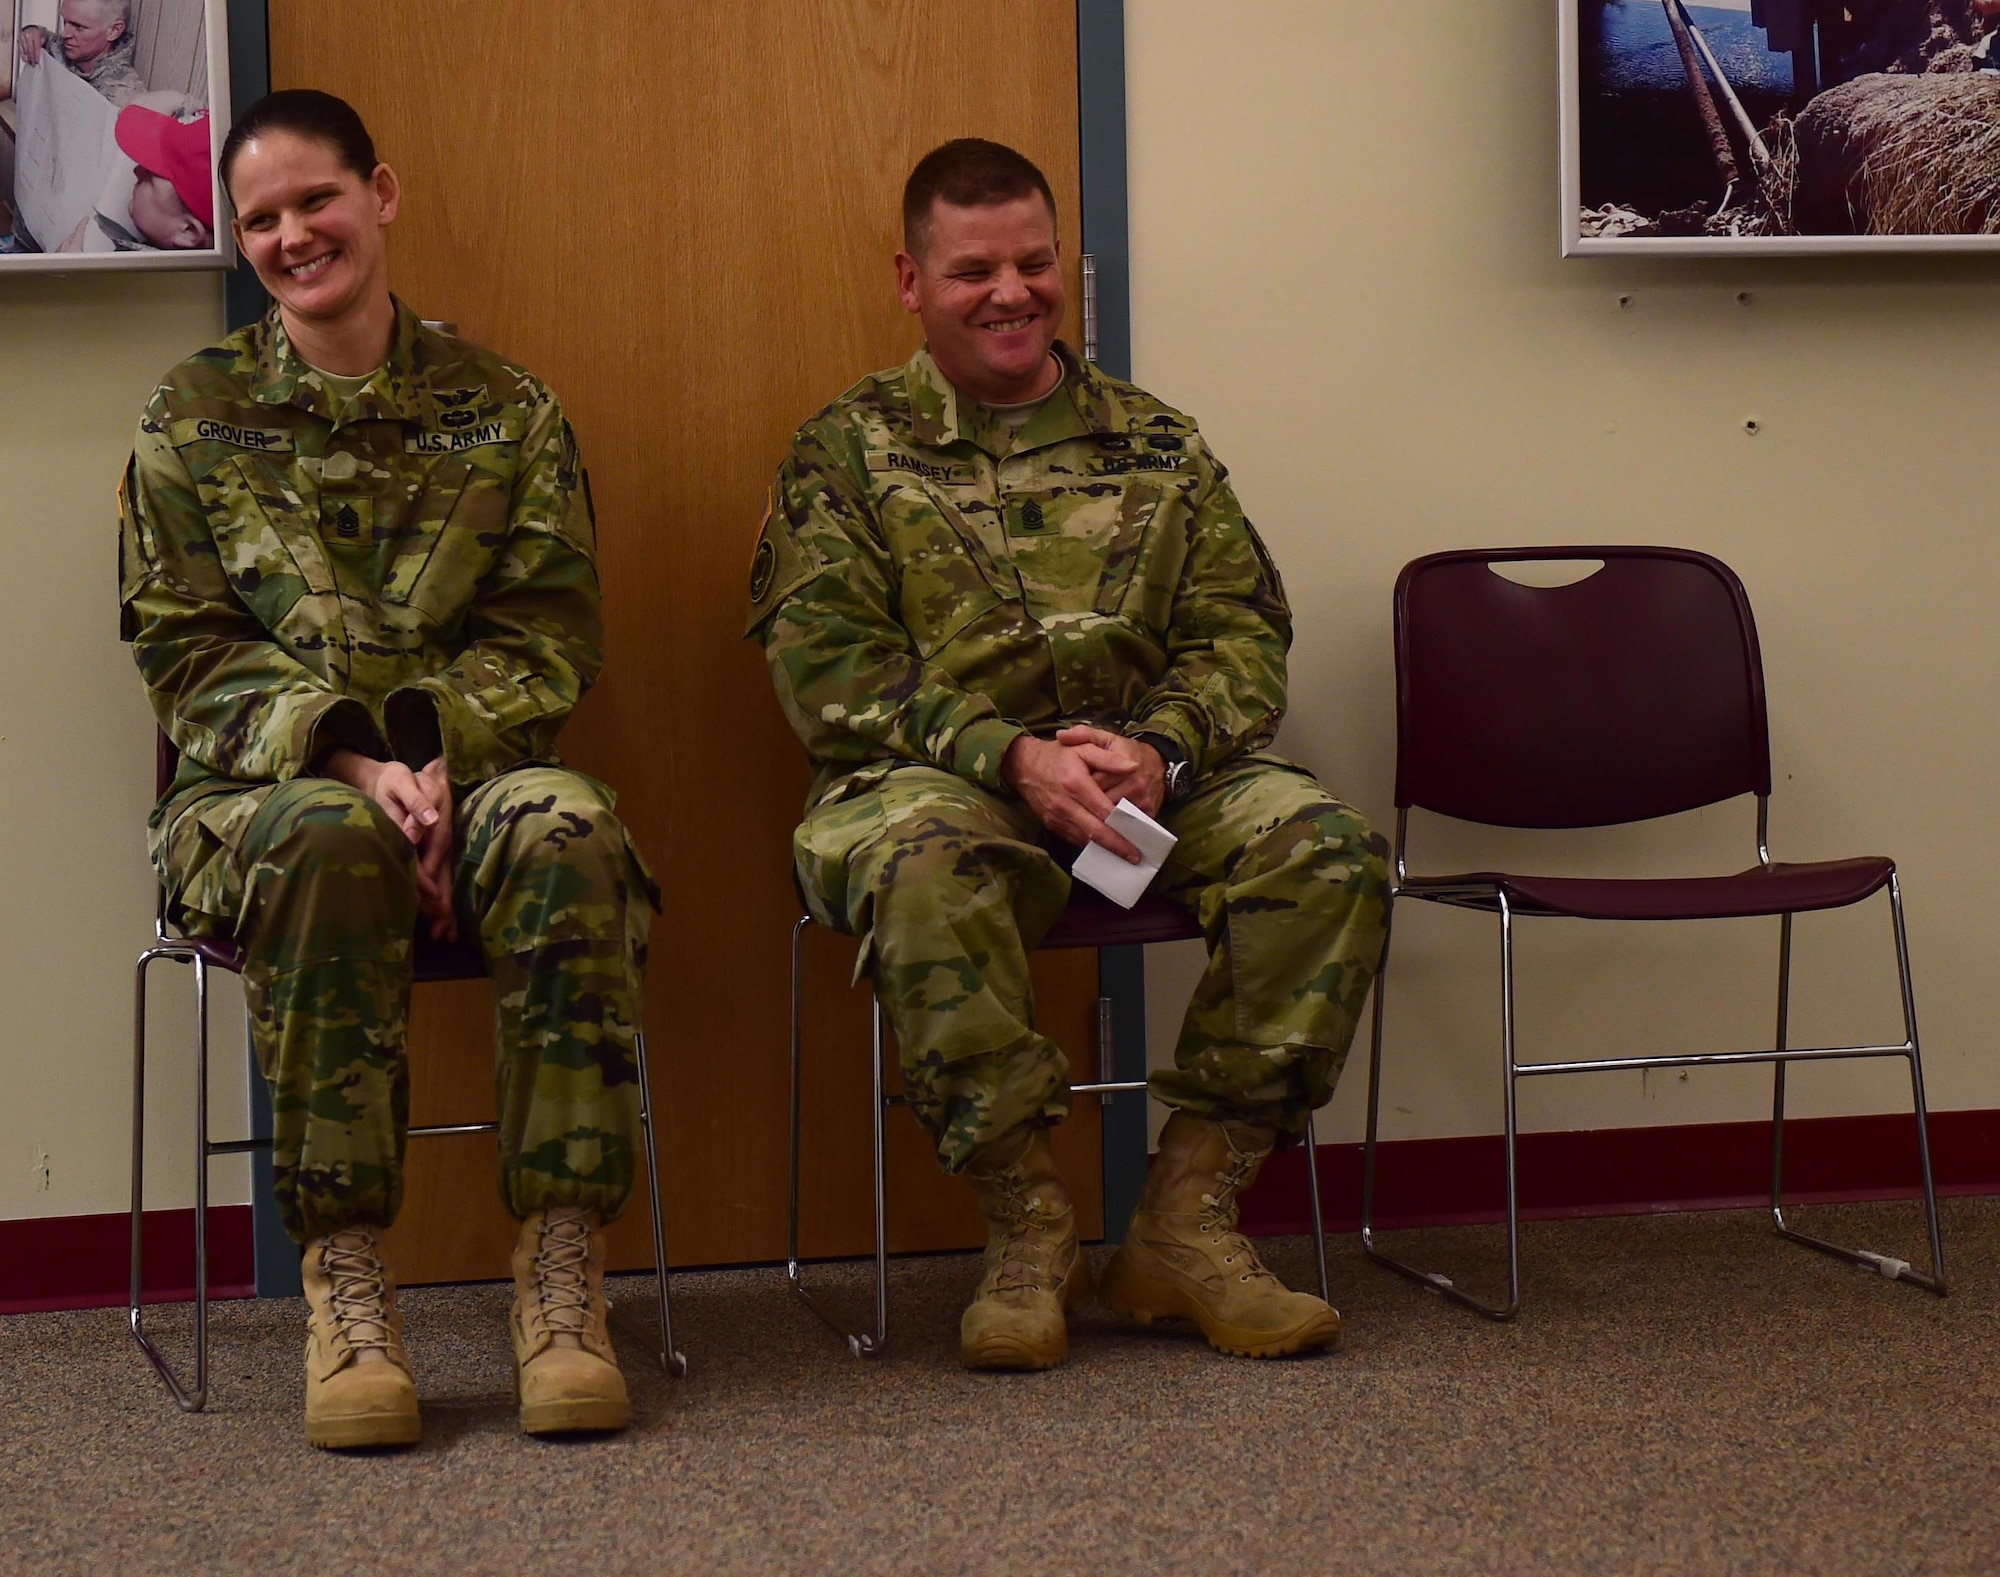 Command Sgt. Maj. Kristin Grover, incoming 743d Military Intelligence Battalion command sergeant major, and Command Sgt. Maj. Raymond S. Ramsey, the outgoing 743d MI Battalion command sergeant major, laugh during a speech Feb. 5, 2016 at Building 706 on Buckley Air Force Base. Ramsey relinquished command to Grover during a change of responsibility ceremony. (U.S. Air Force photo by Airman 1st Class Gabrielle Spradling/Released)